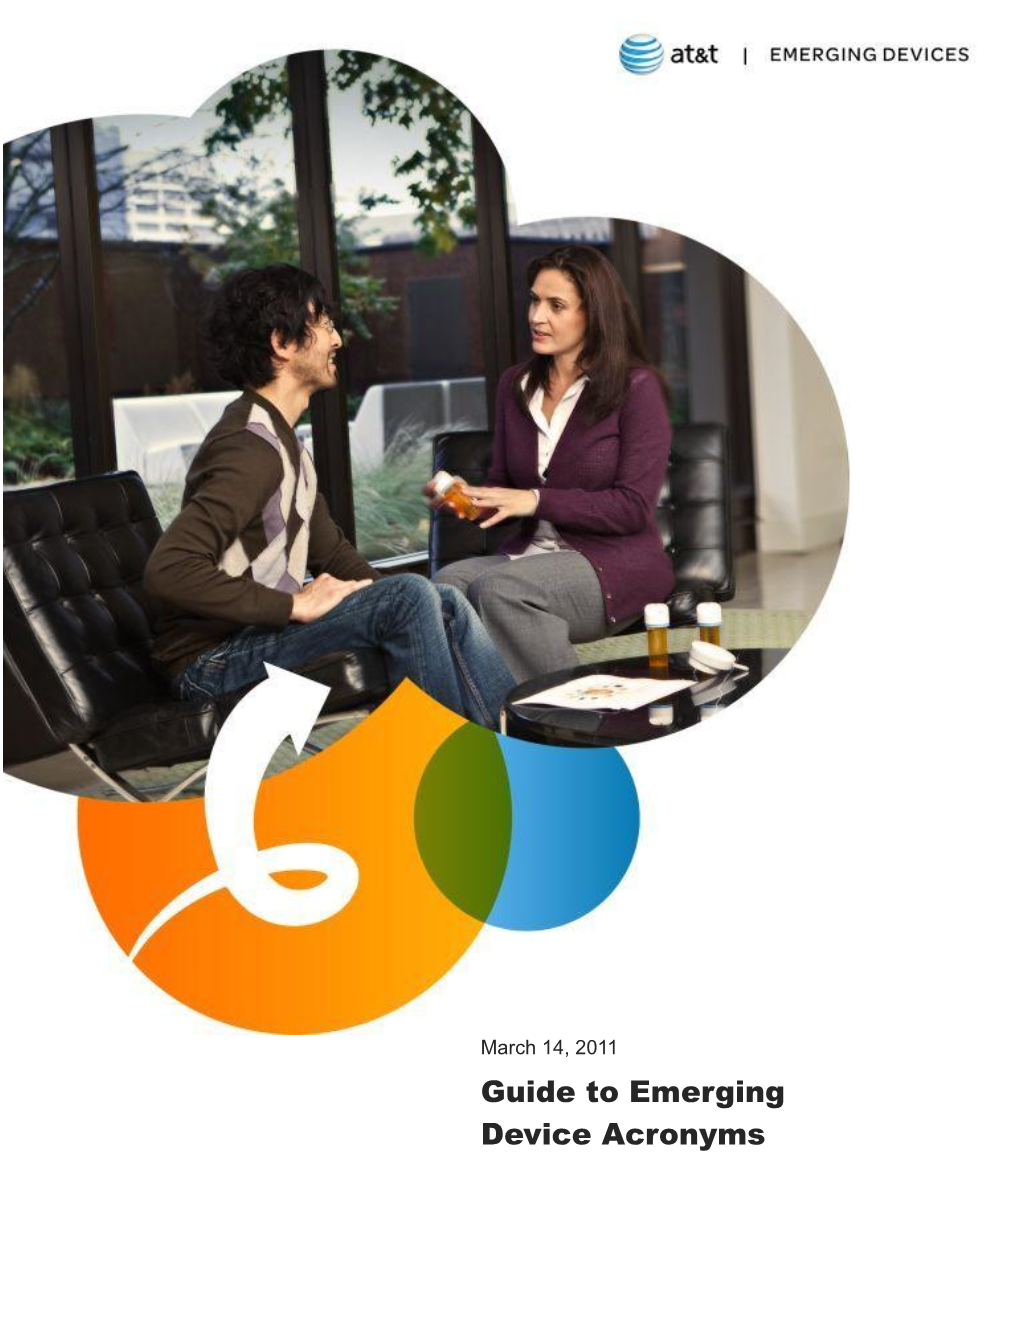 Guide to Emerging Device Acronyms ©2011 AT&T Inc